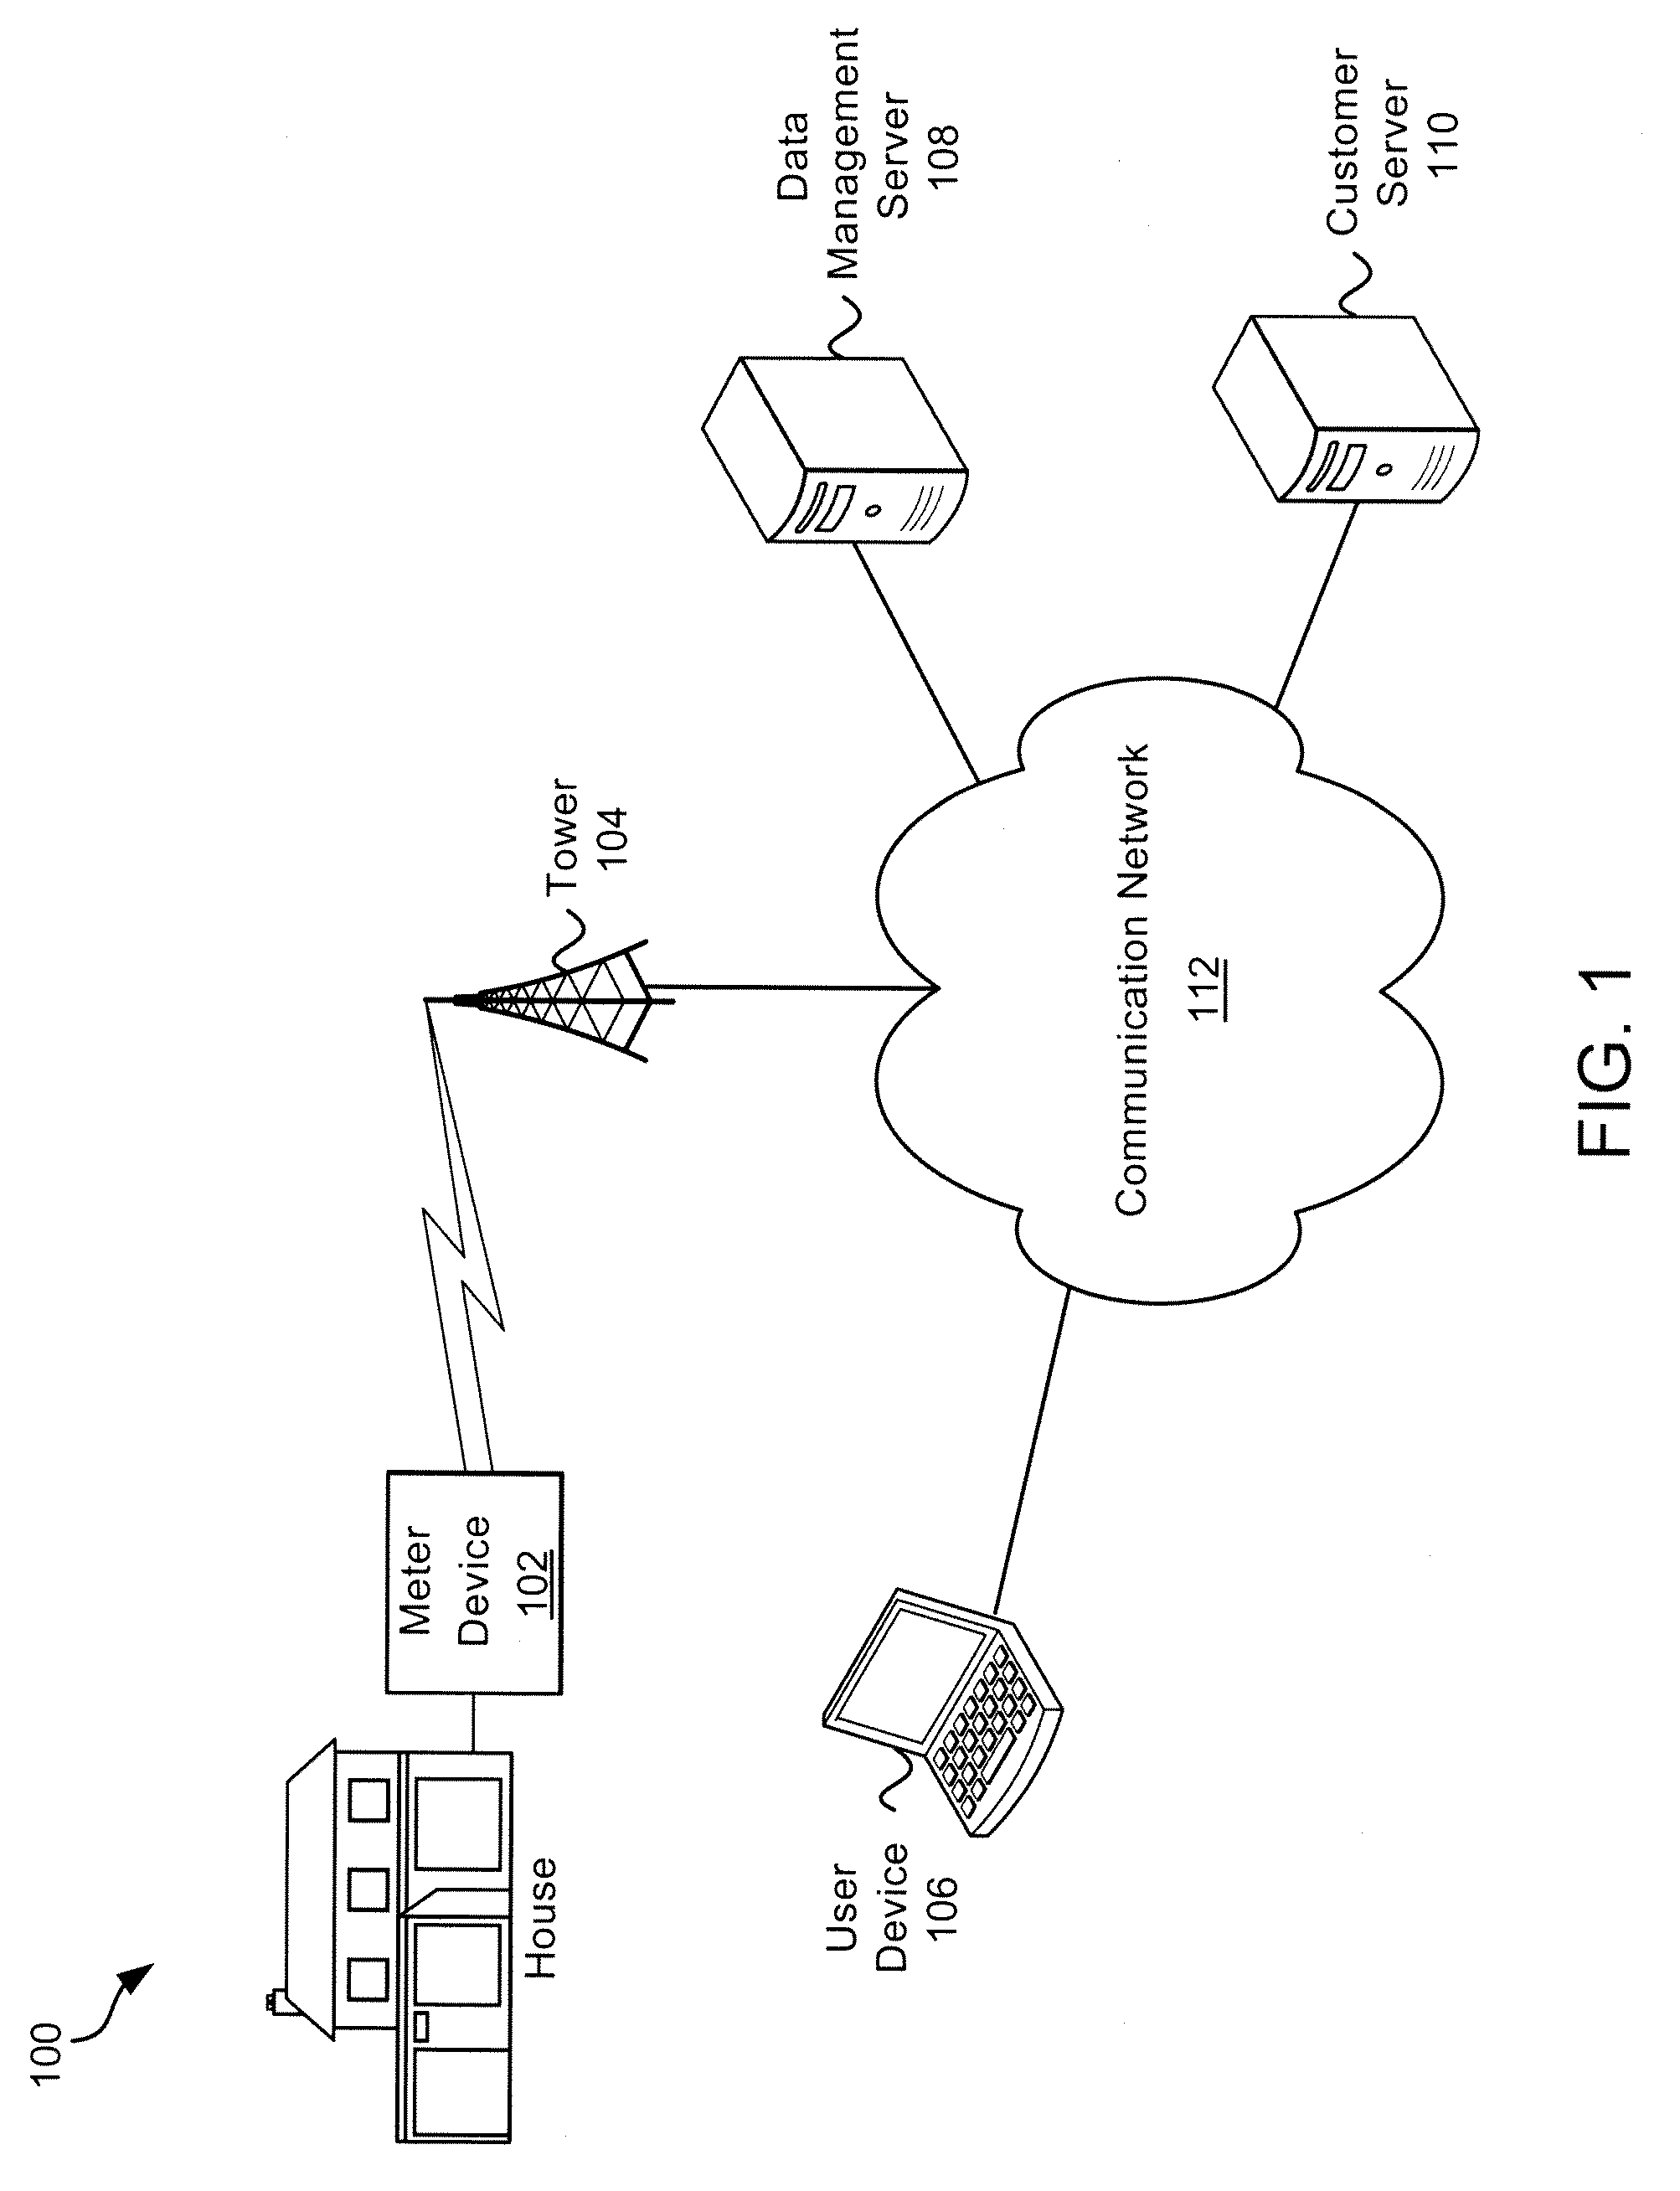 Systems and Methods of Interaction with Water Usage Information